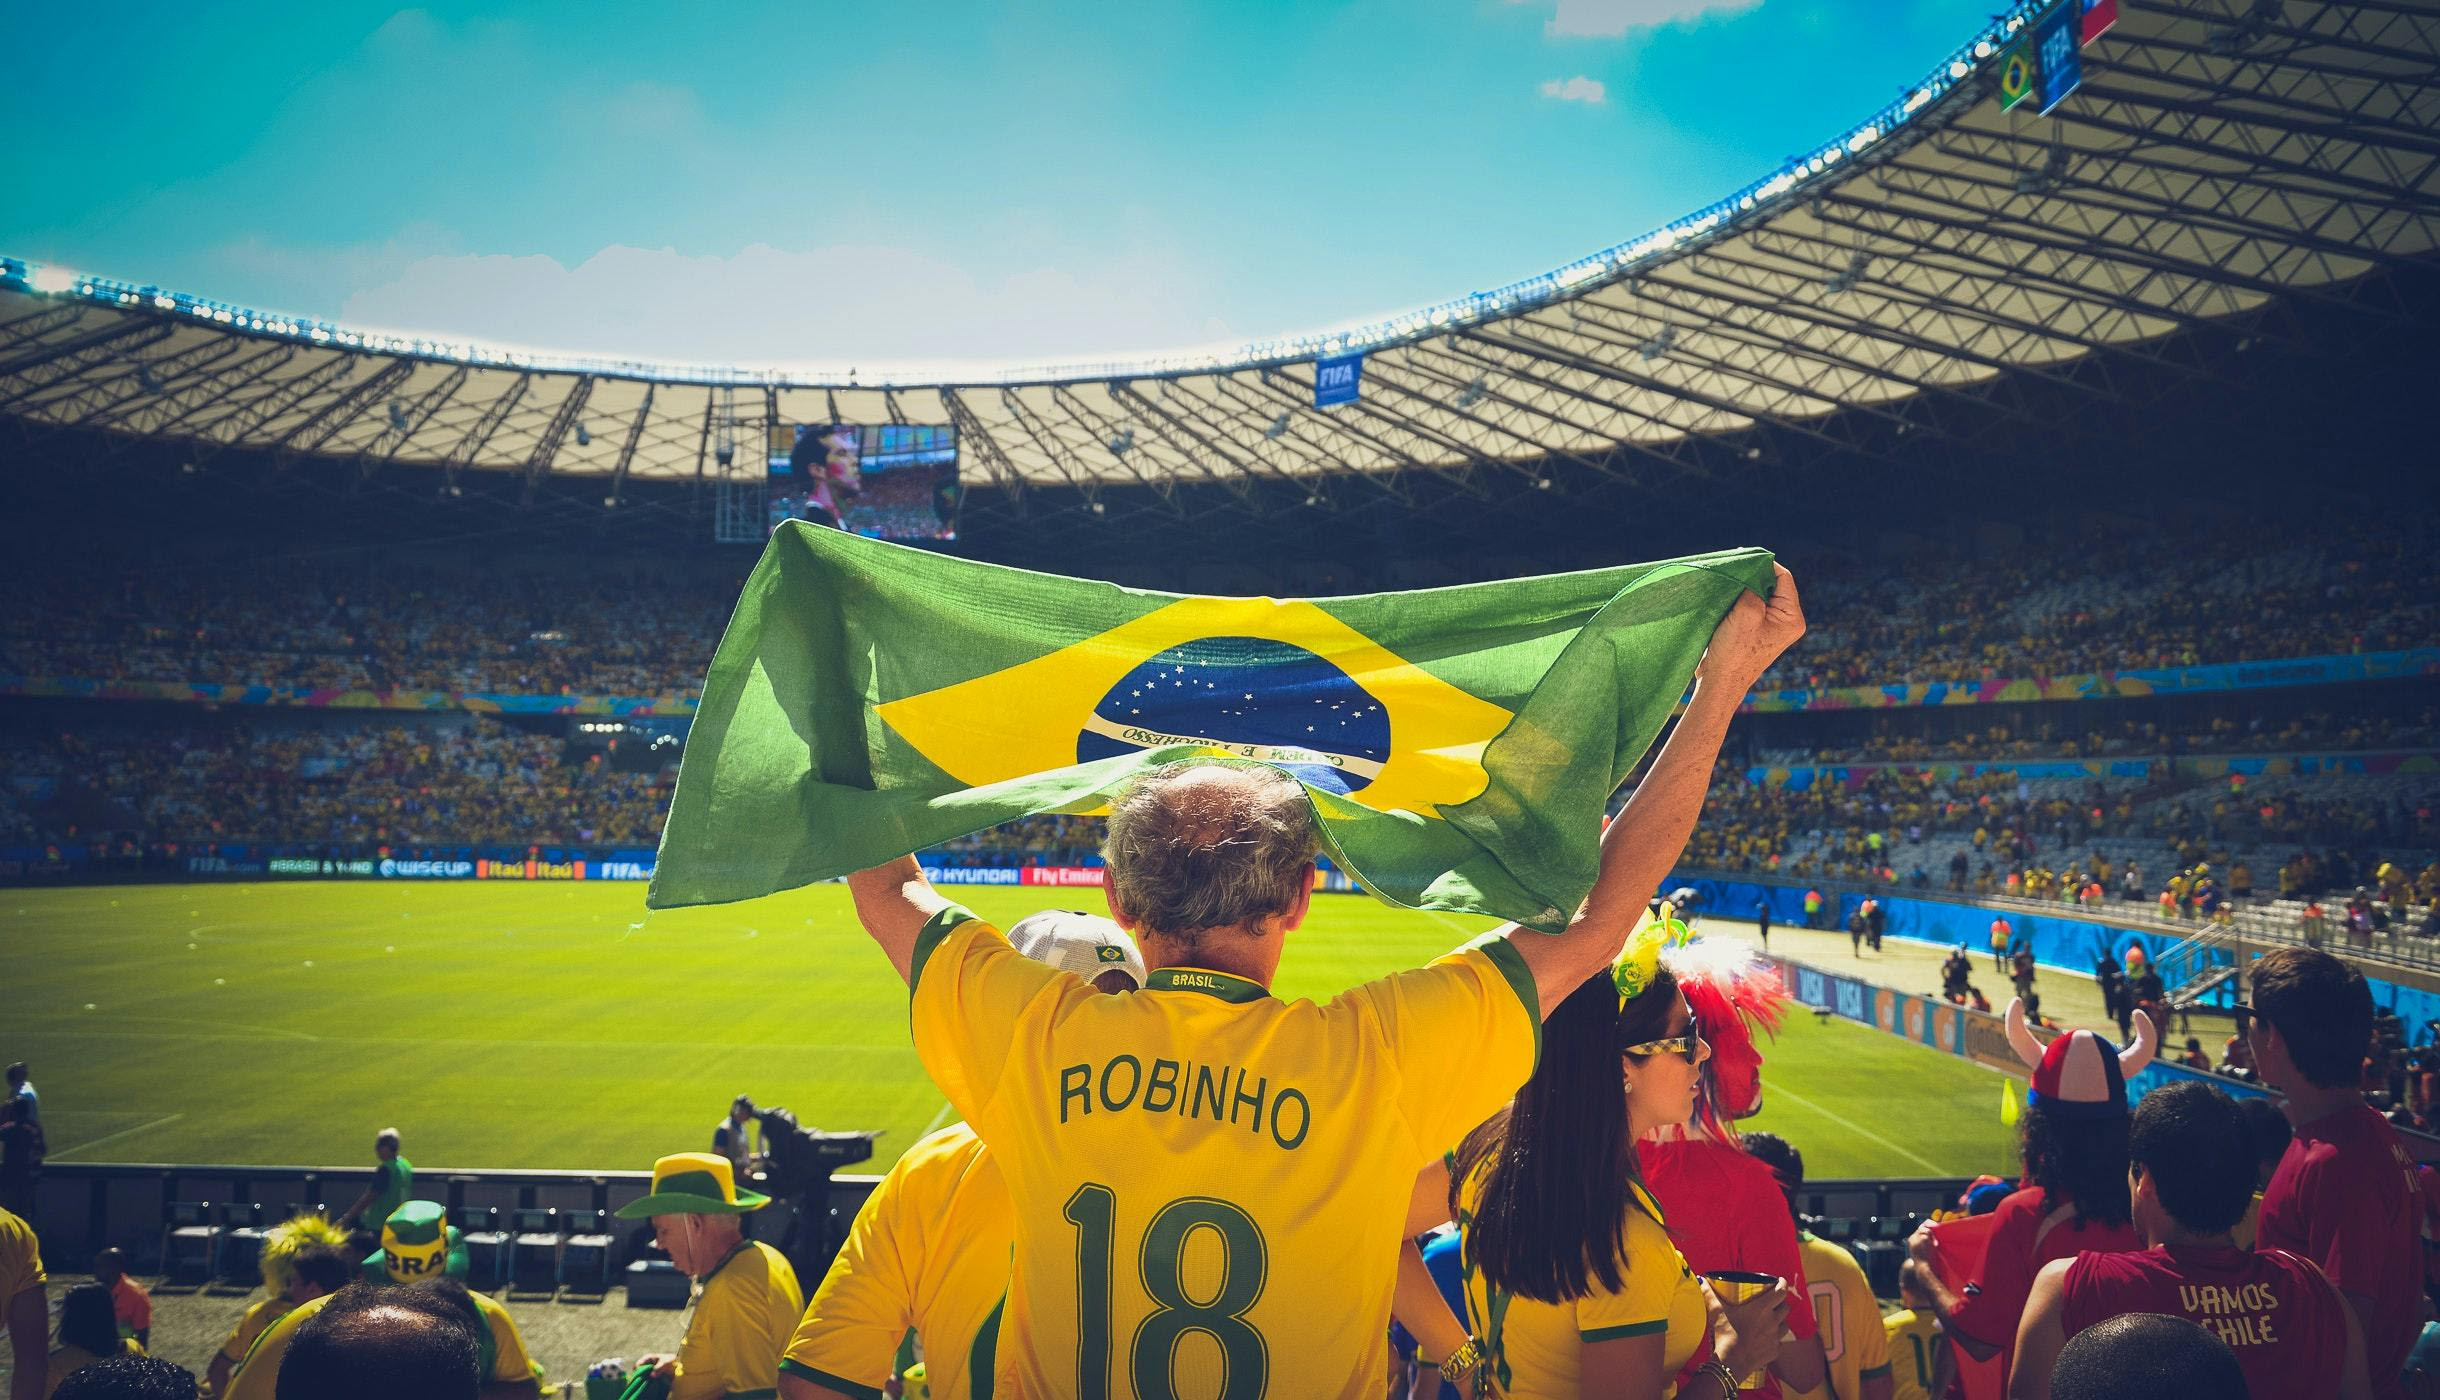 World Cup cheering for Brazil